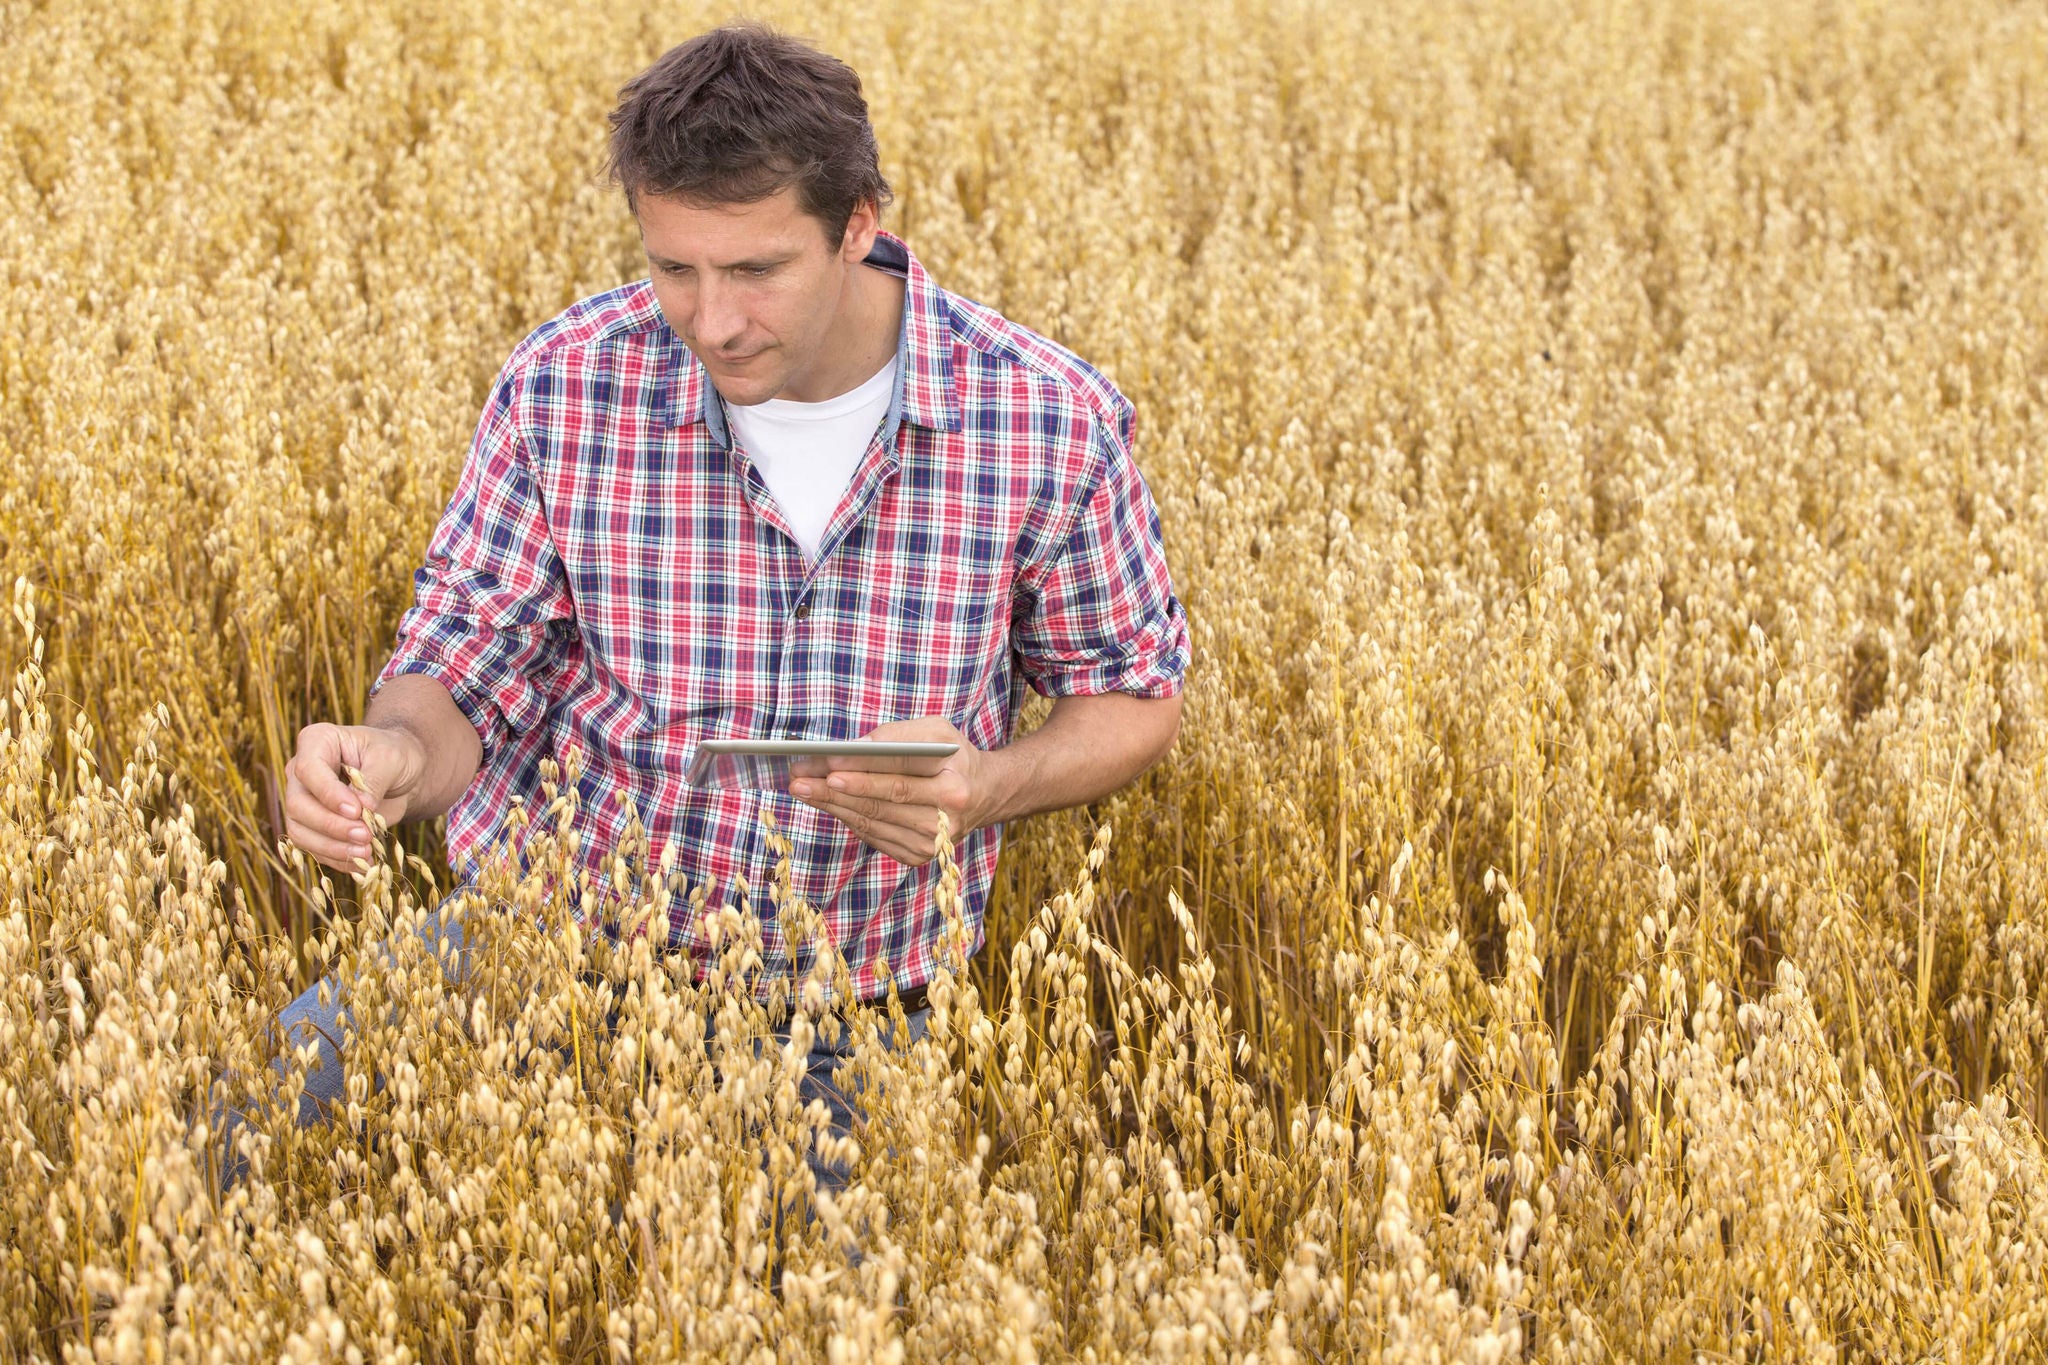 A farmer inspects the wheat field static